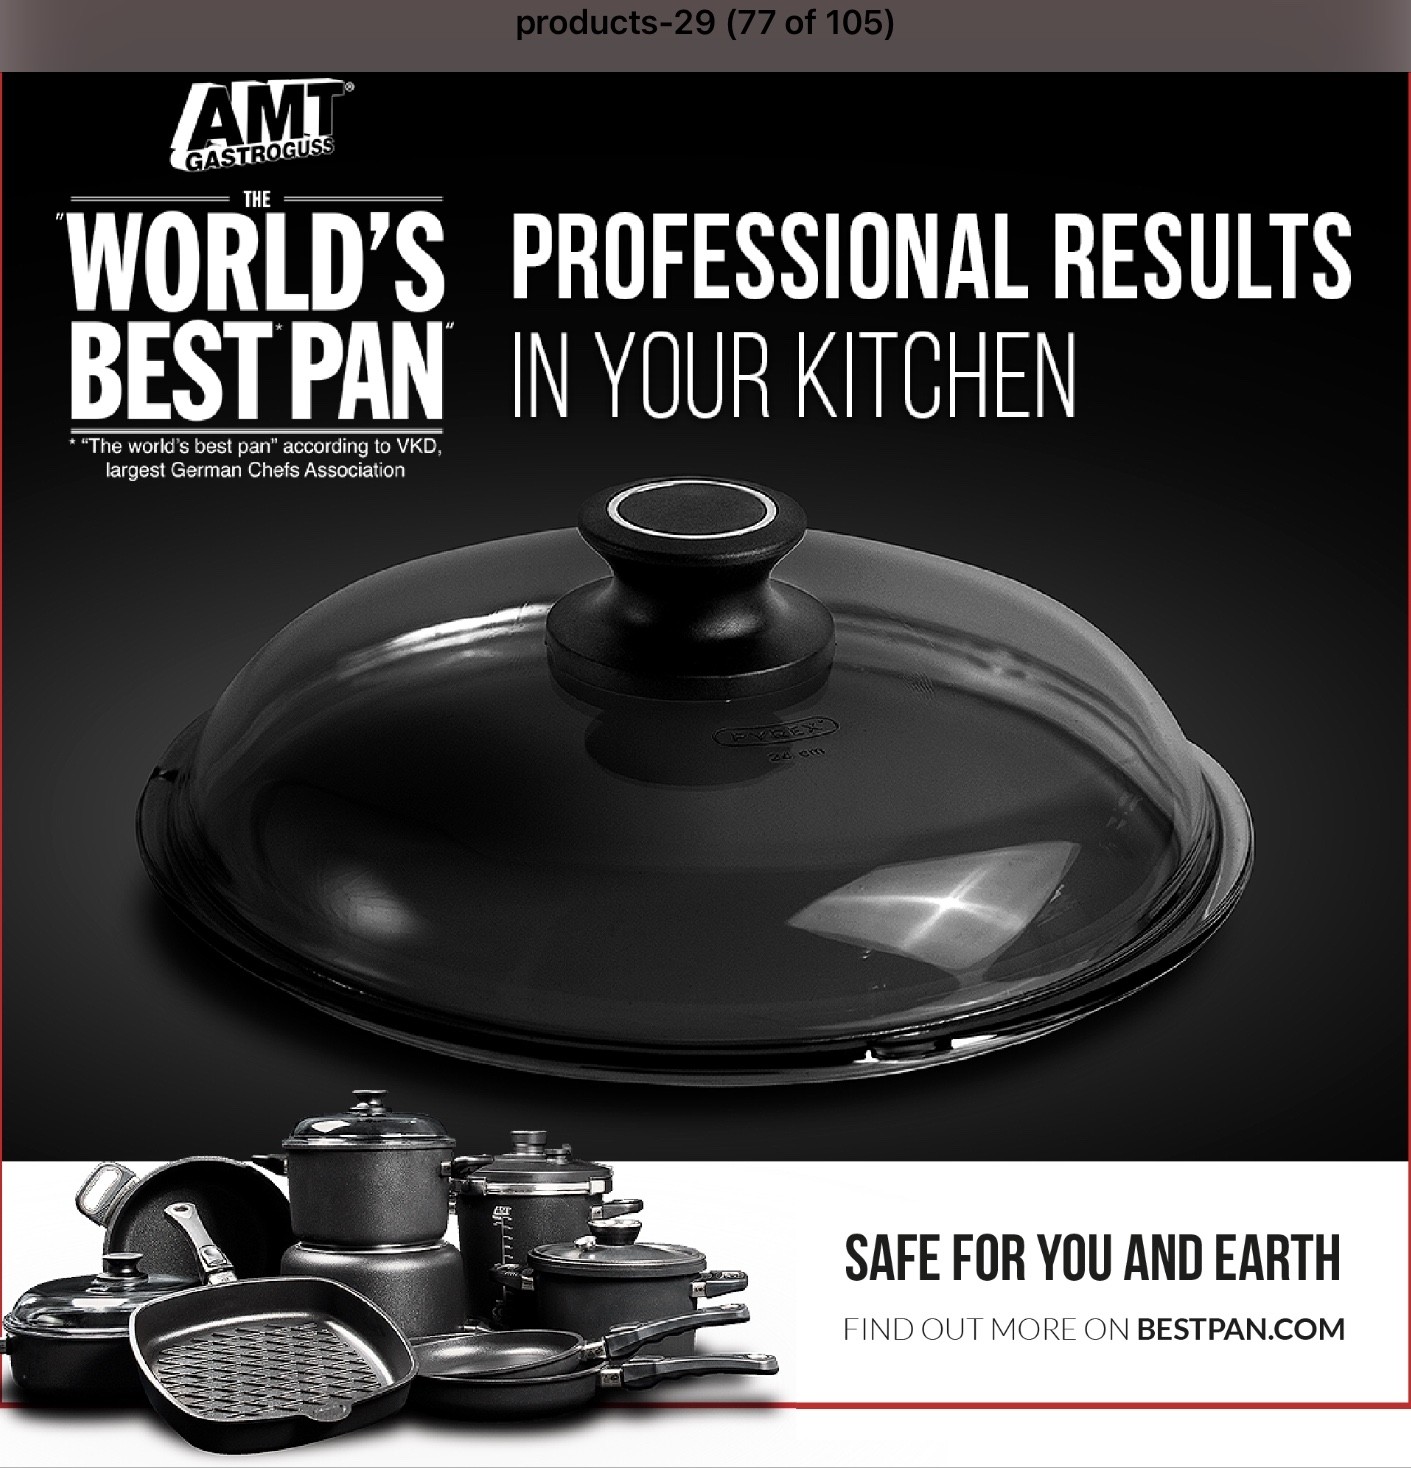 Purchase the 28cm AMT glass lid online at smithsofloughton.com